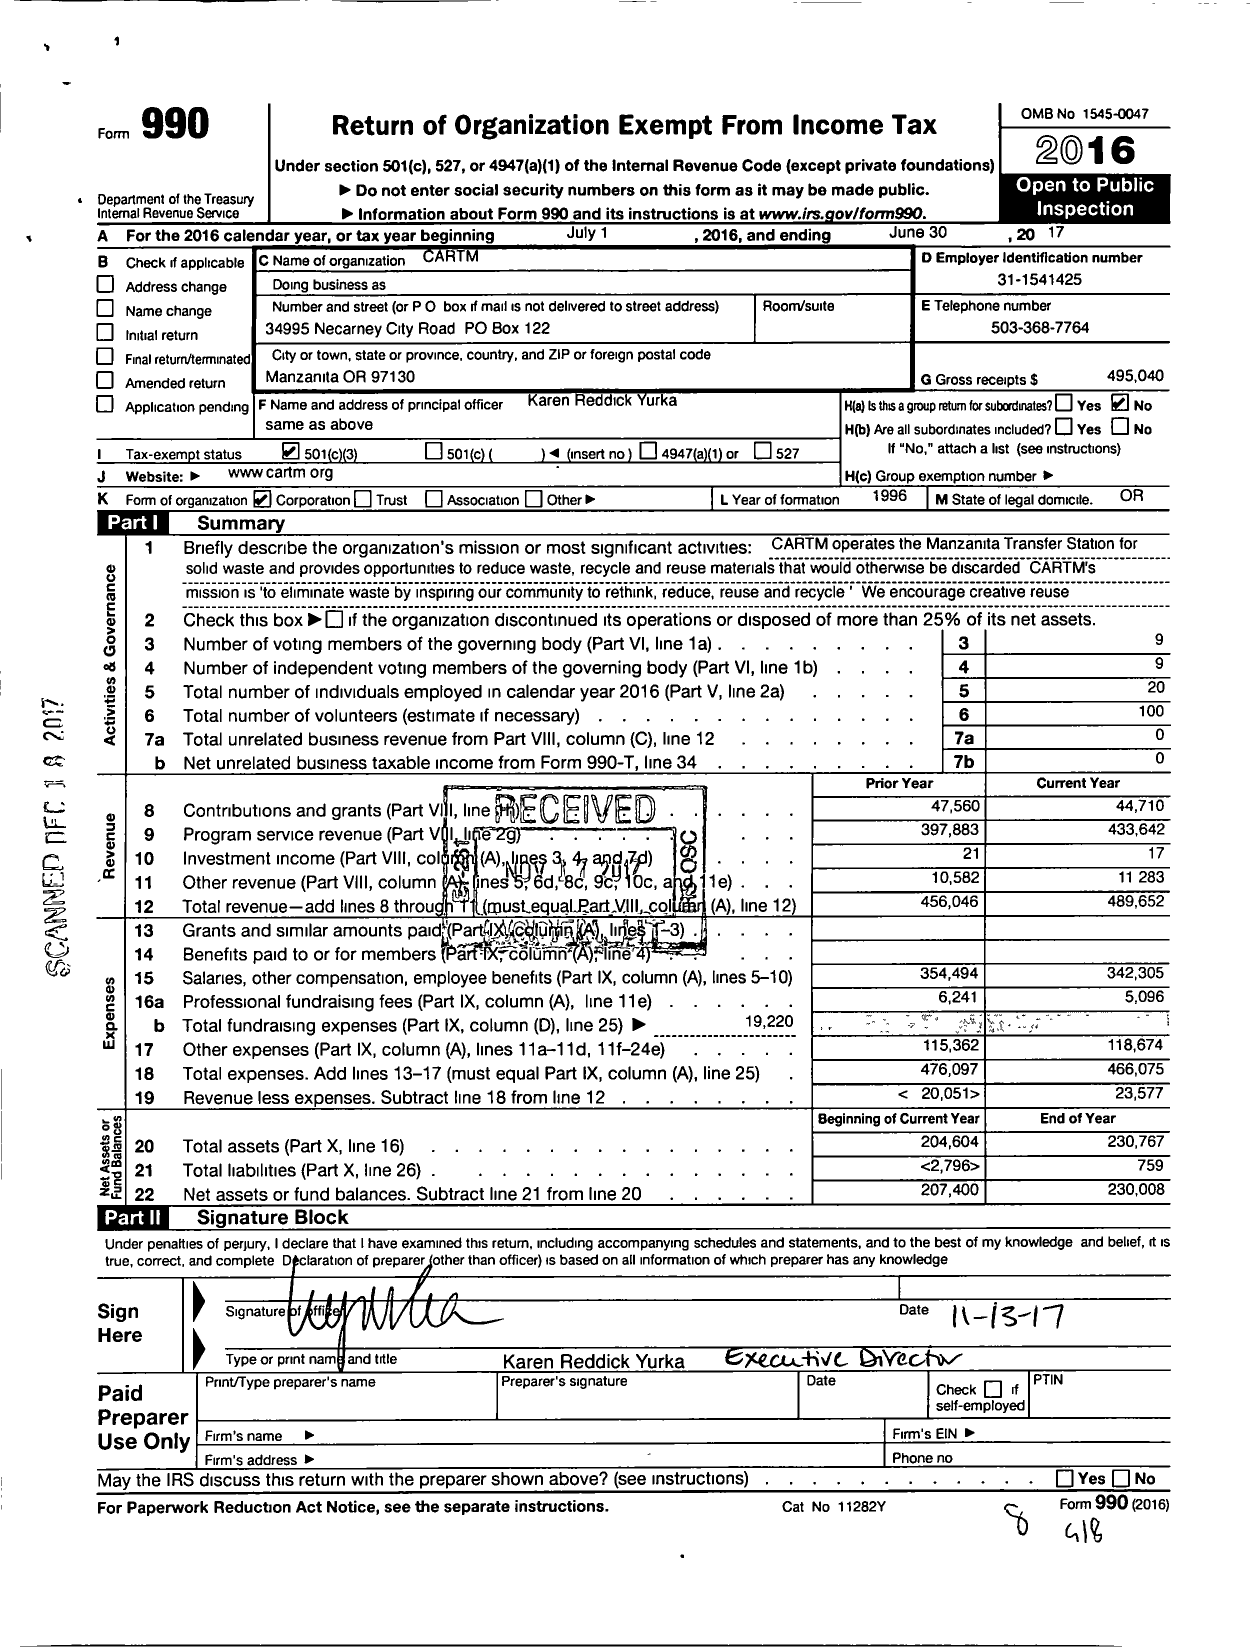 Image of first page of 2016 Form 990 for Cartm